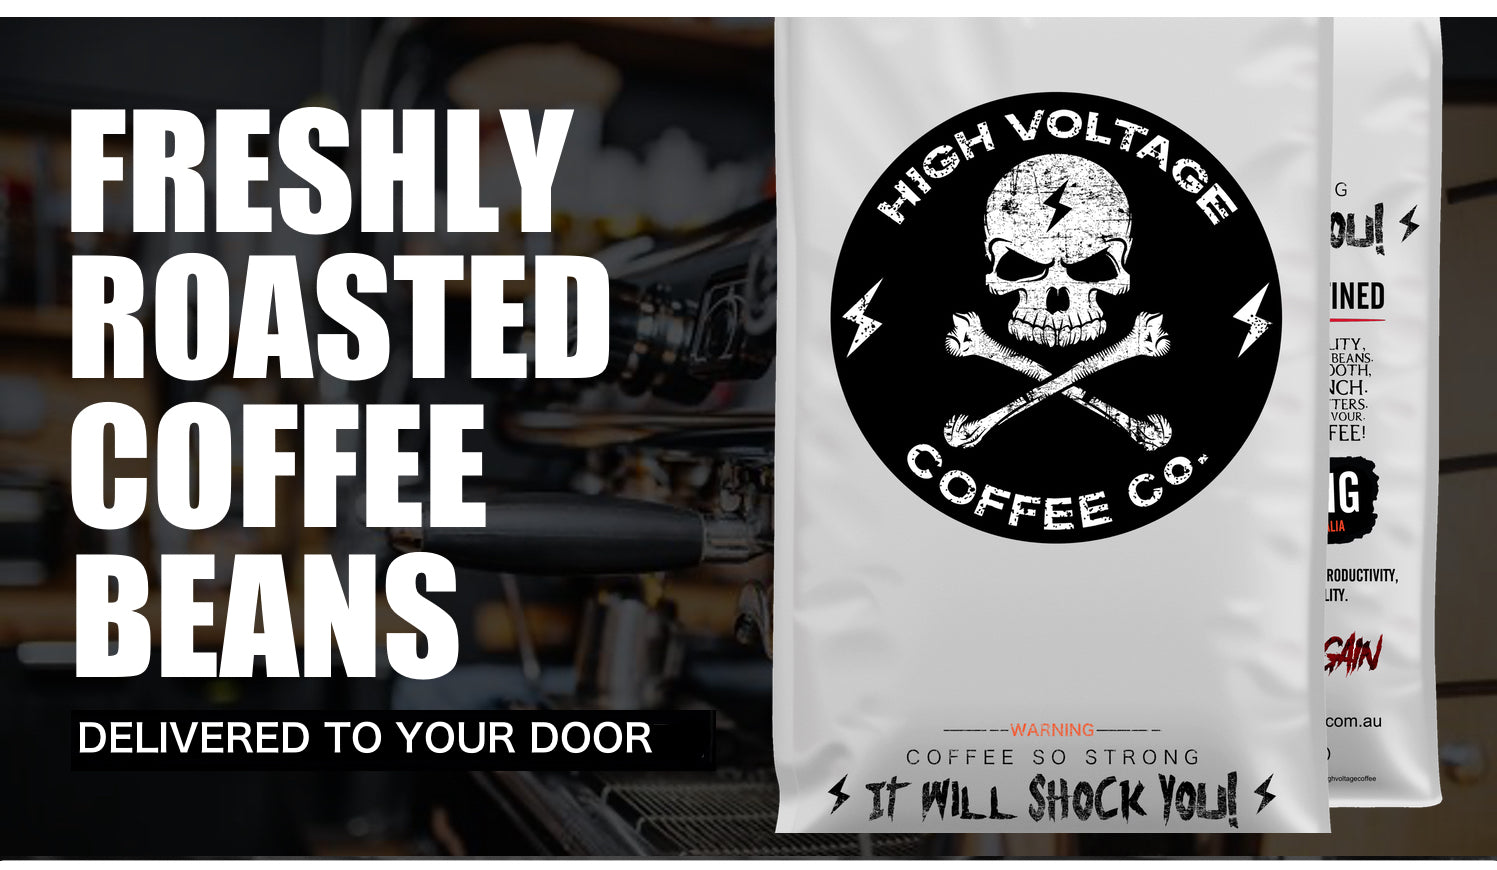 A bold advertisement for high voltage coffee co. features a coffee bag with a skull and crossbones, highlighting its "freshly roasted coffee beans" as extremely strong coffee beans. strongest coffee in australia.